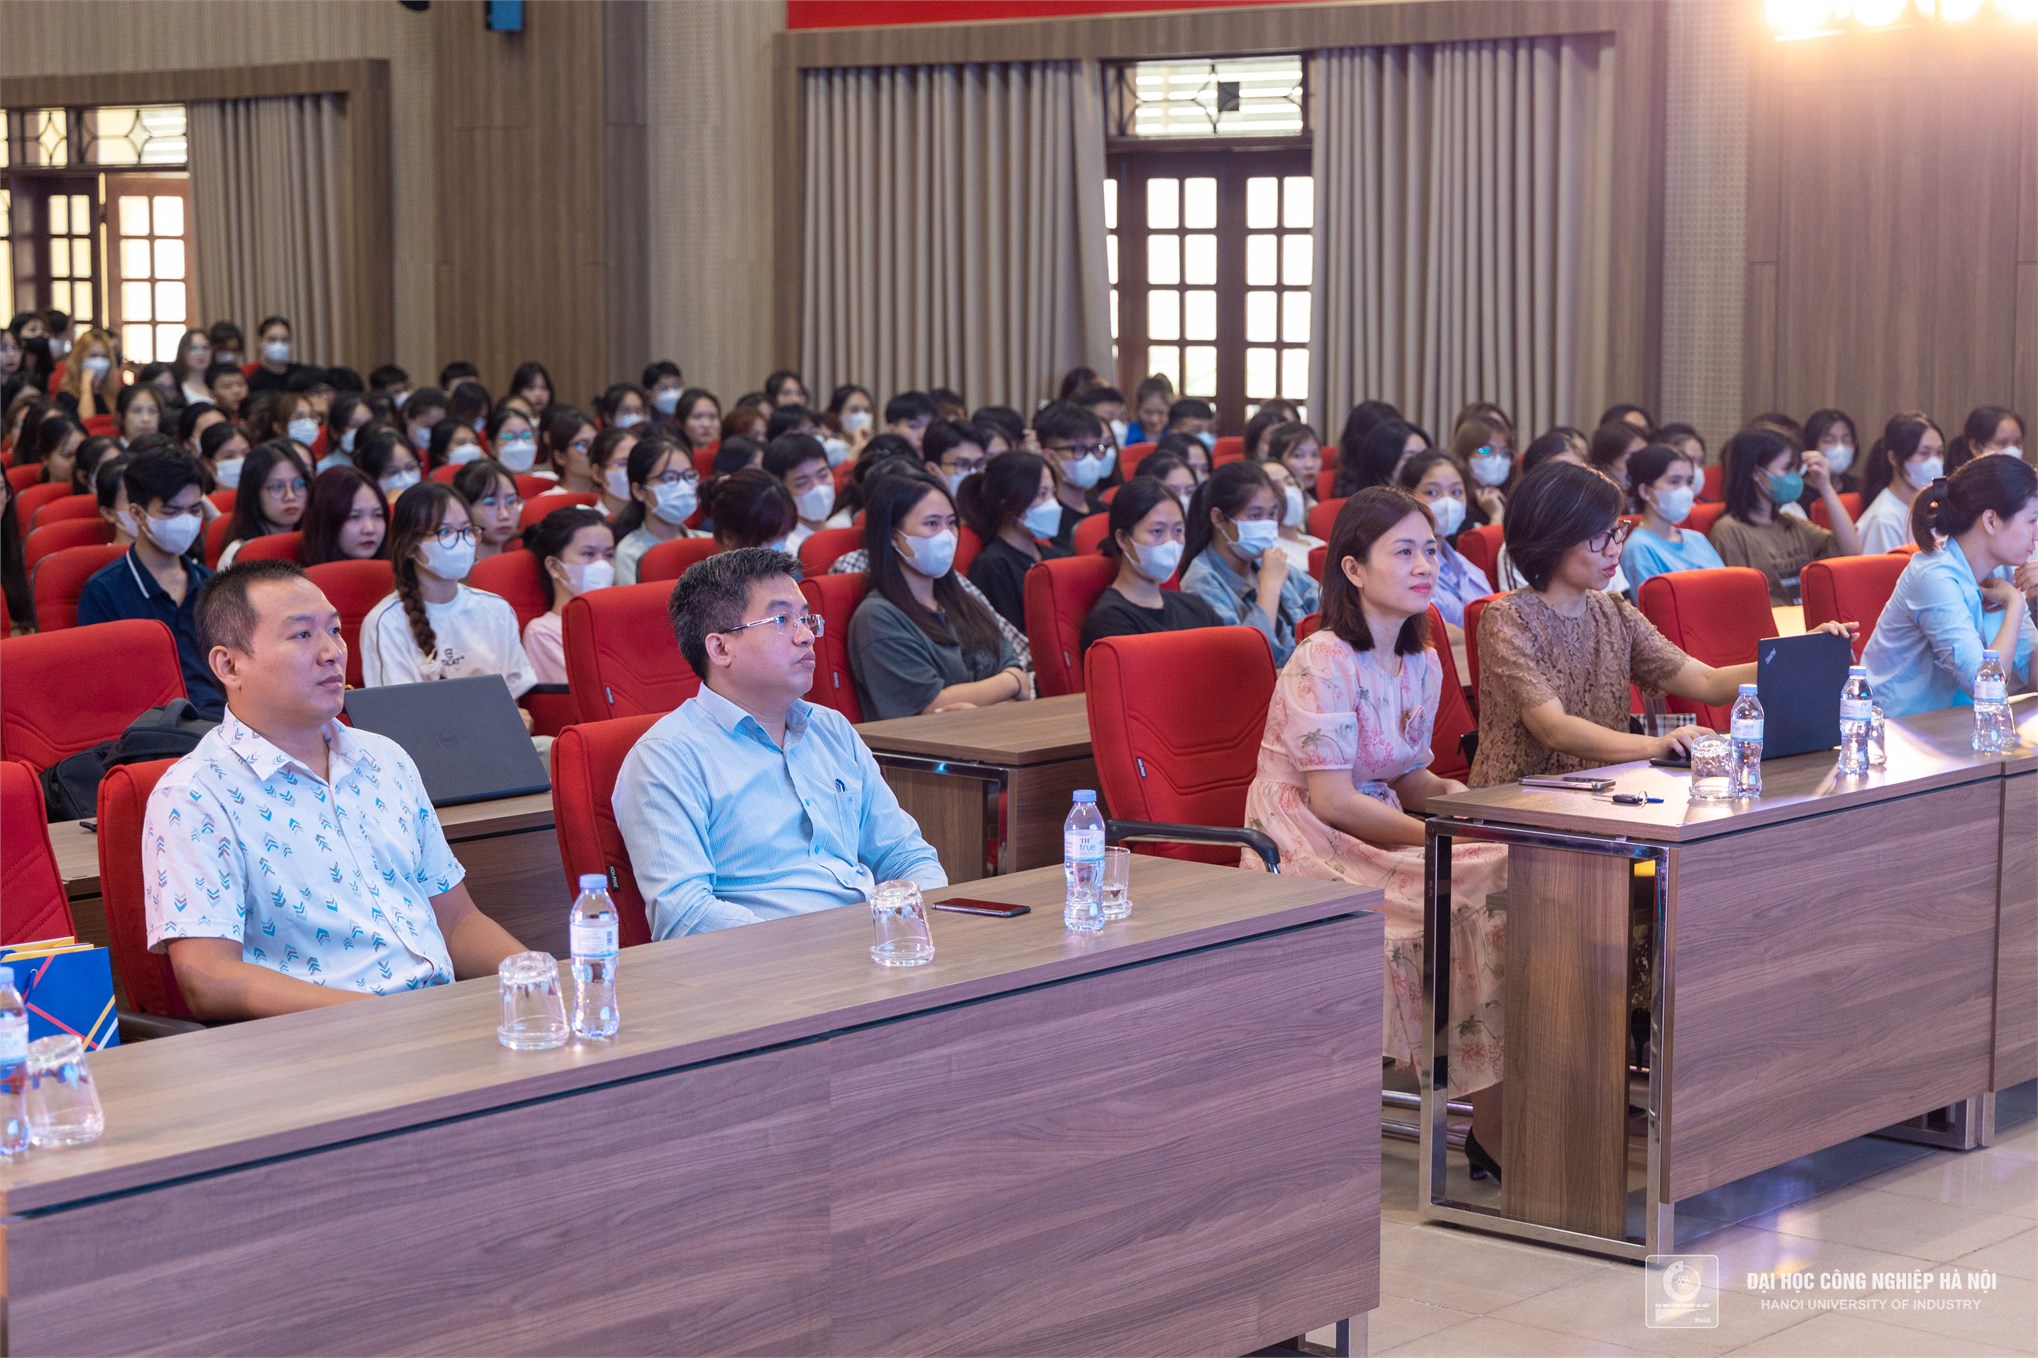 Seminar on Career Orientation in Accounting and Auditing with International Certification